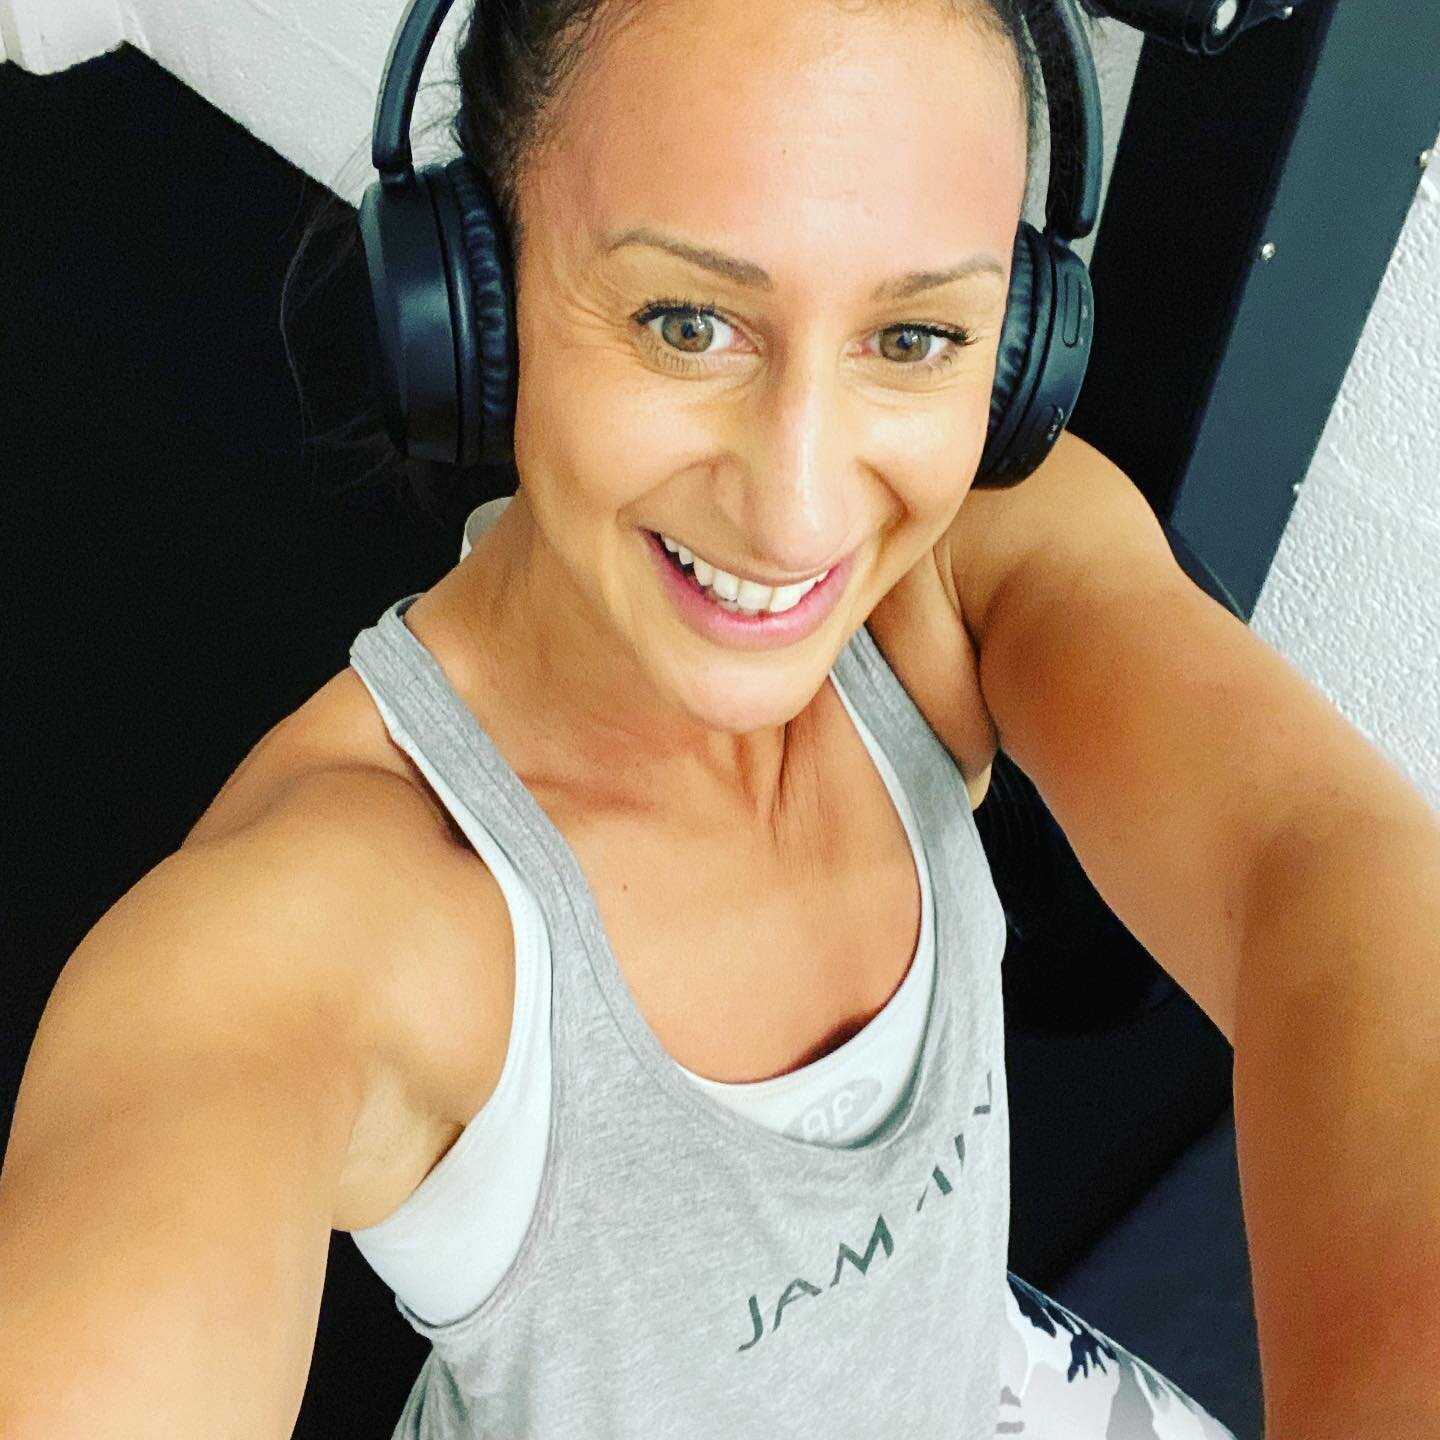 Sweaty one today.💦⁣
⁣
⁣
⁣
⁣#personaltraining #fitness #personaltrainer #workout #training #gym #fitnessmotivation #fit #motivation #health #fitfam #bodybuilding #exercise #weightloss #strength #functionaltraining #healthylifestyle #crossfit #nutriti